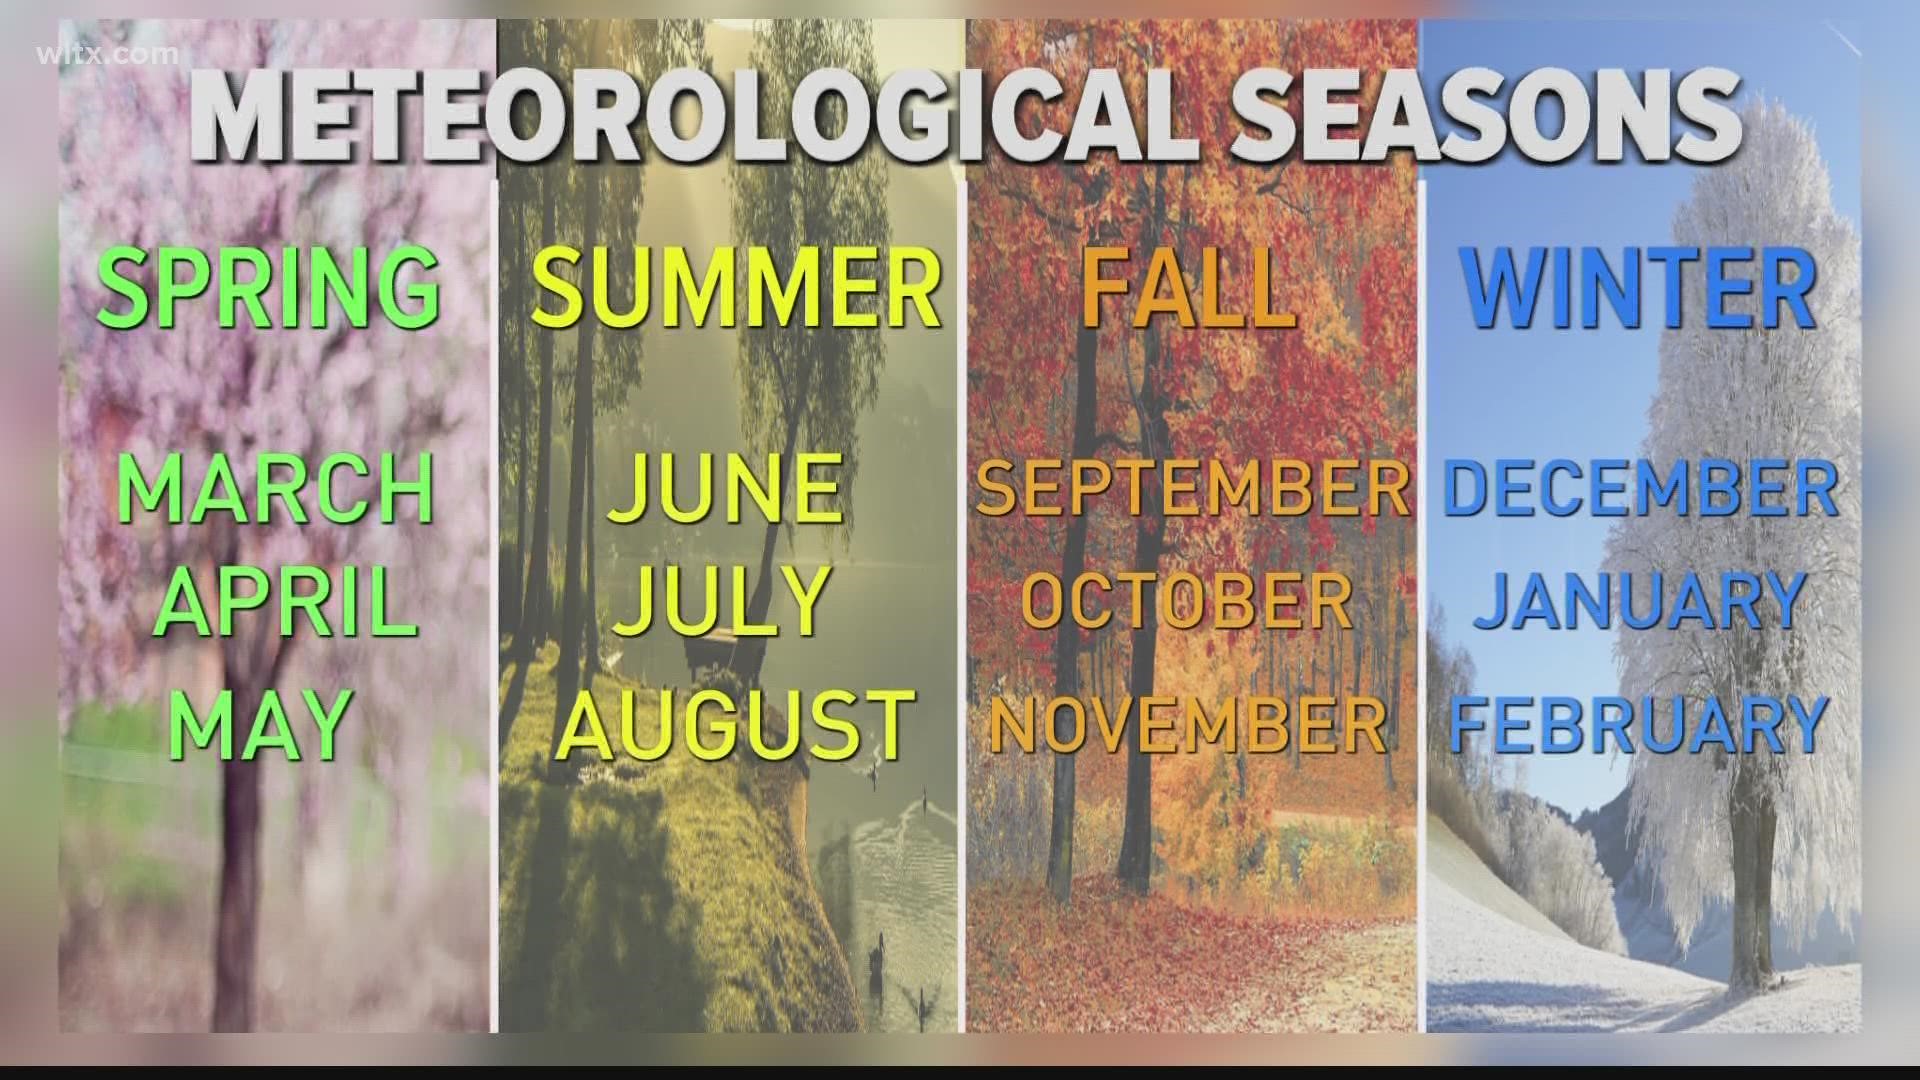 But for meteorologists their Winter season started at the beginning of December.